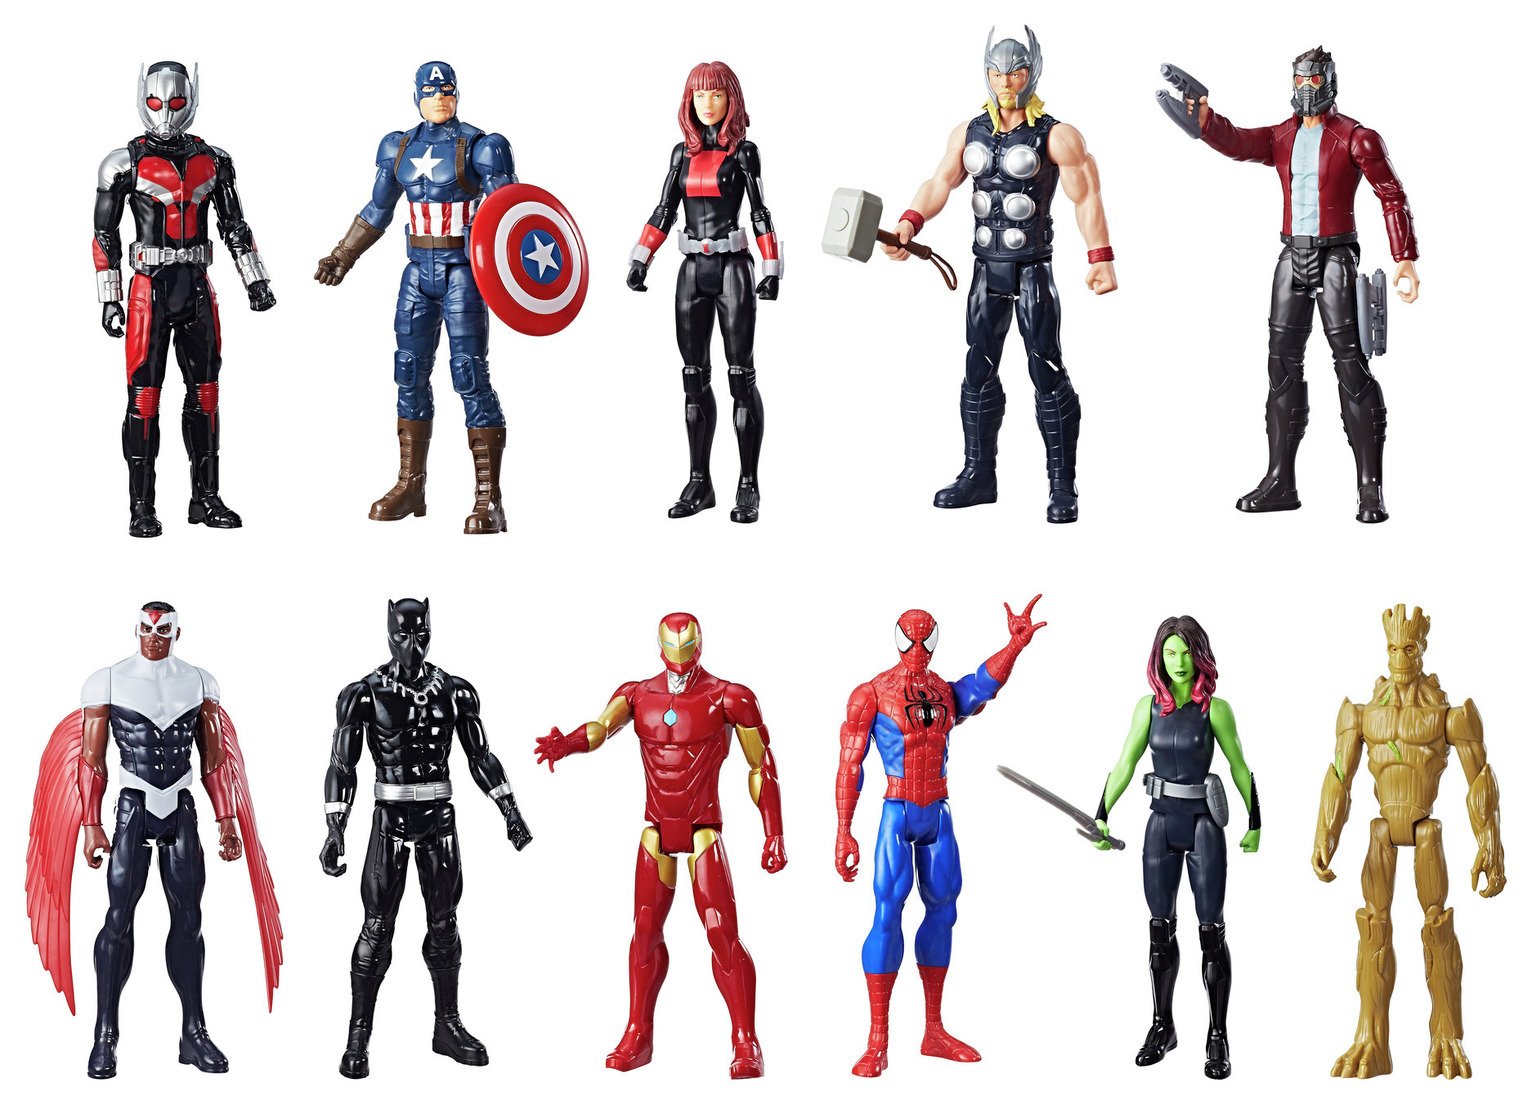 Marvel Titan Hero Series Mega Collection 11-pack review